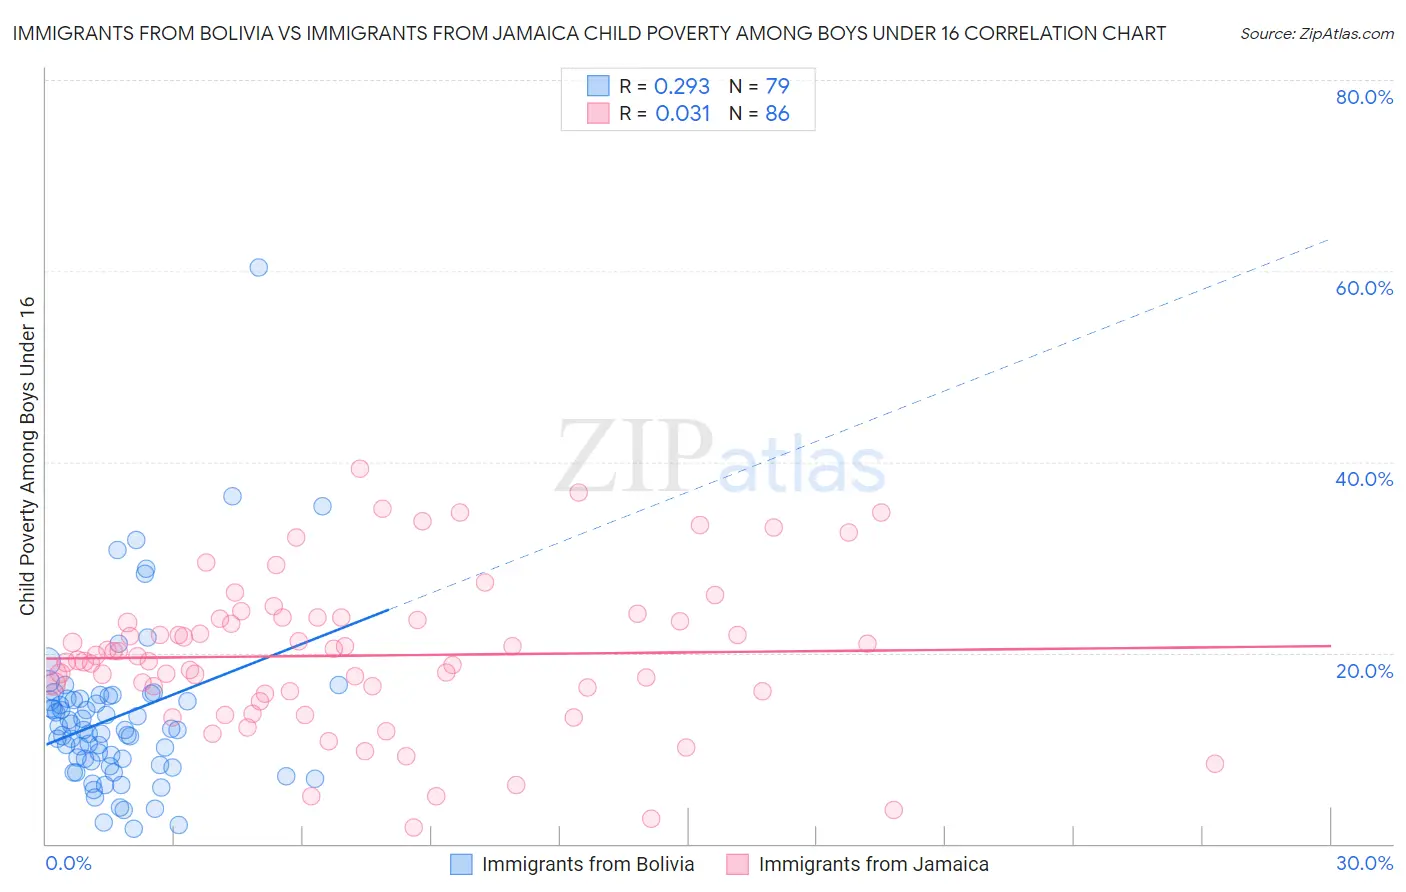 Immigrants from Bolivia vs Immigrants from Jamaica Child Poverty Among Boys Under 16